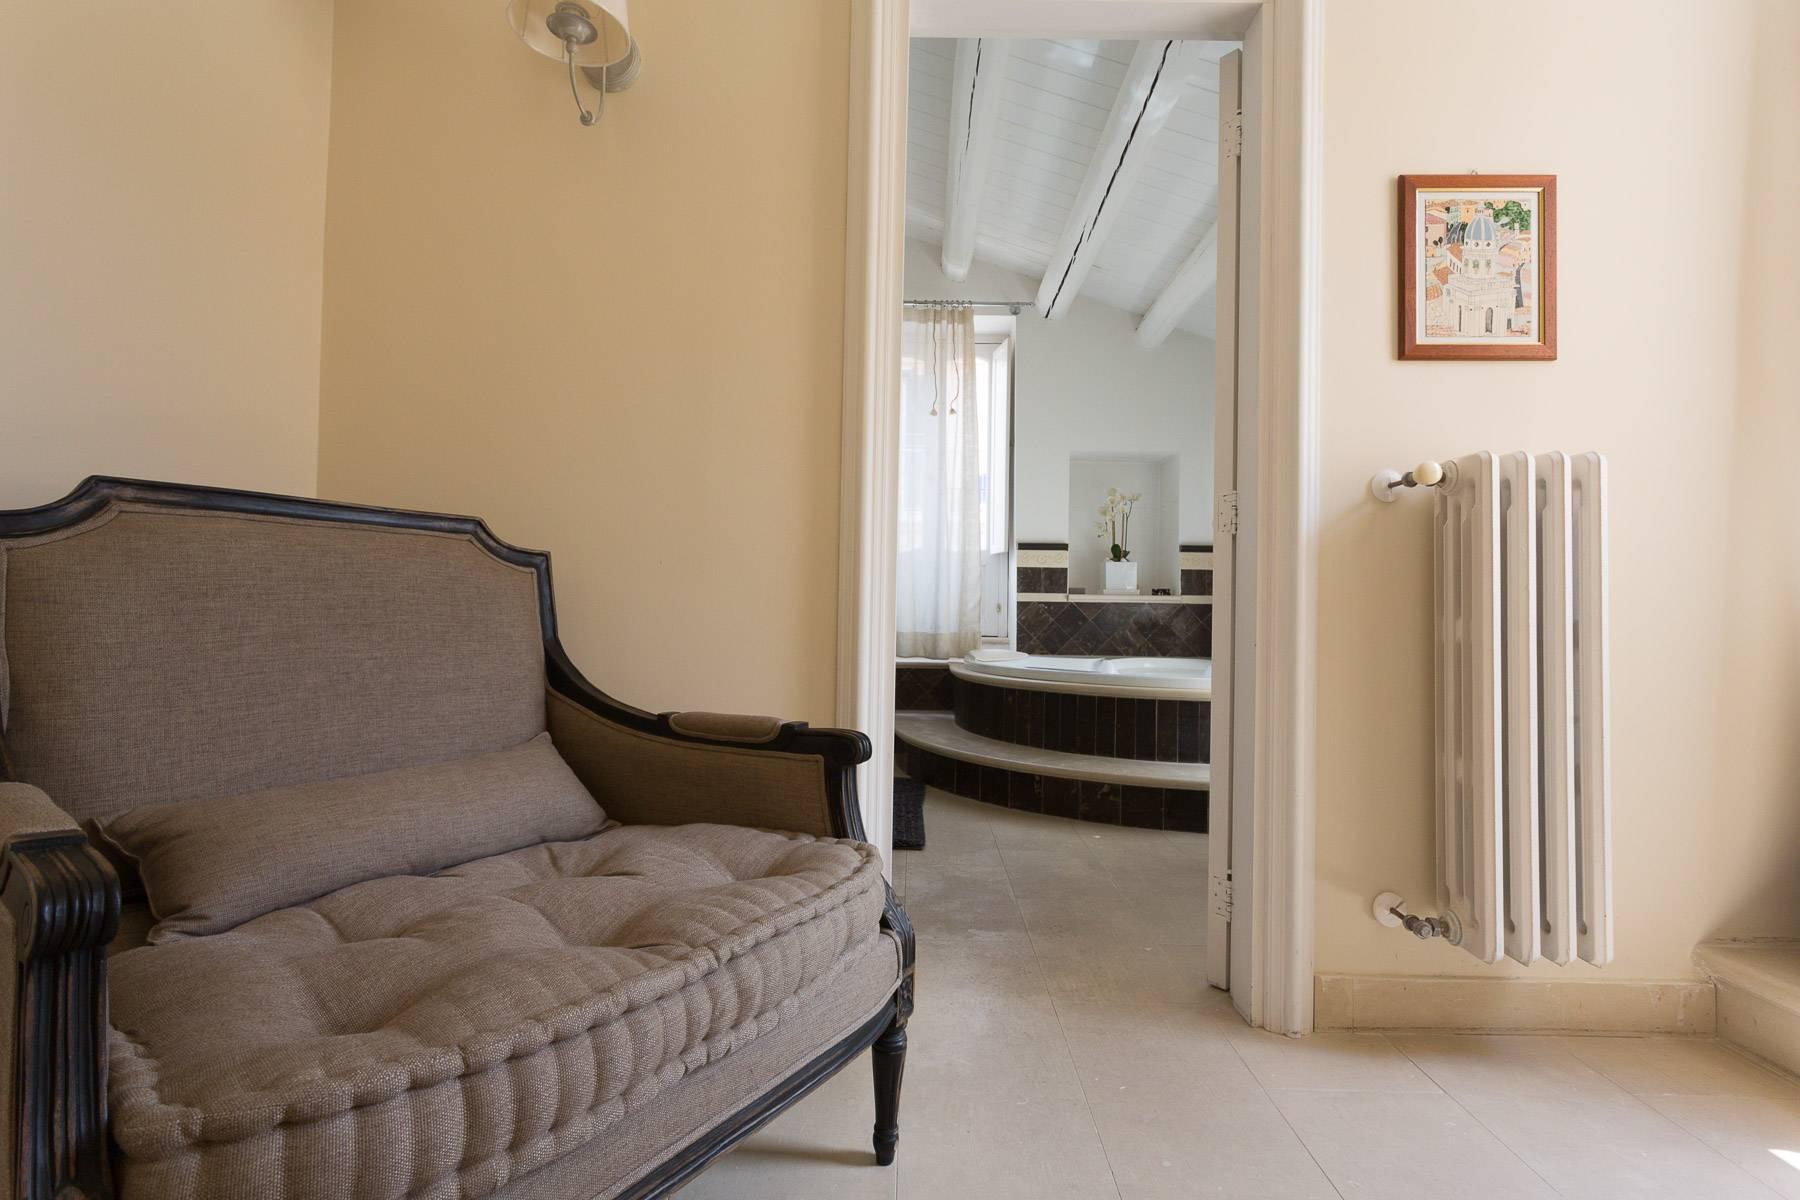 Exclusive house in the historical centre of Ragusa - 6